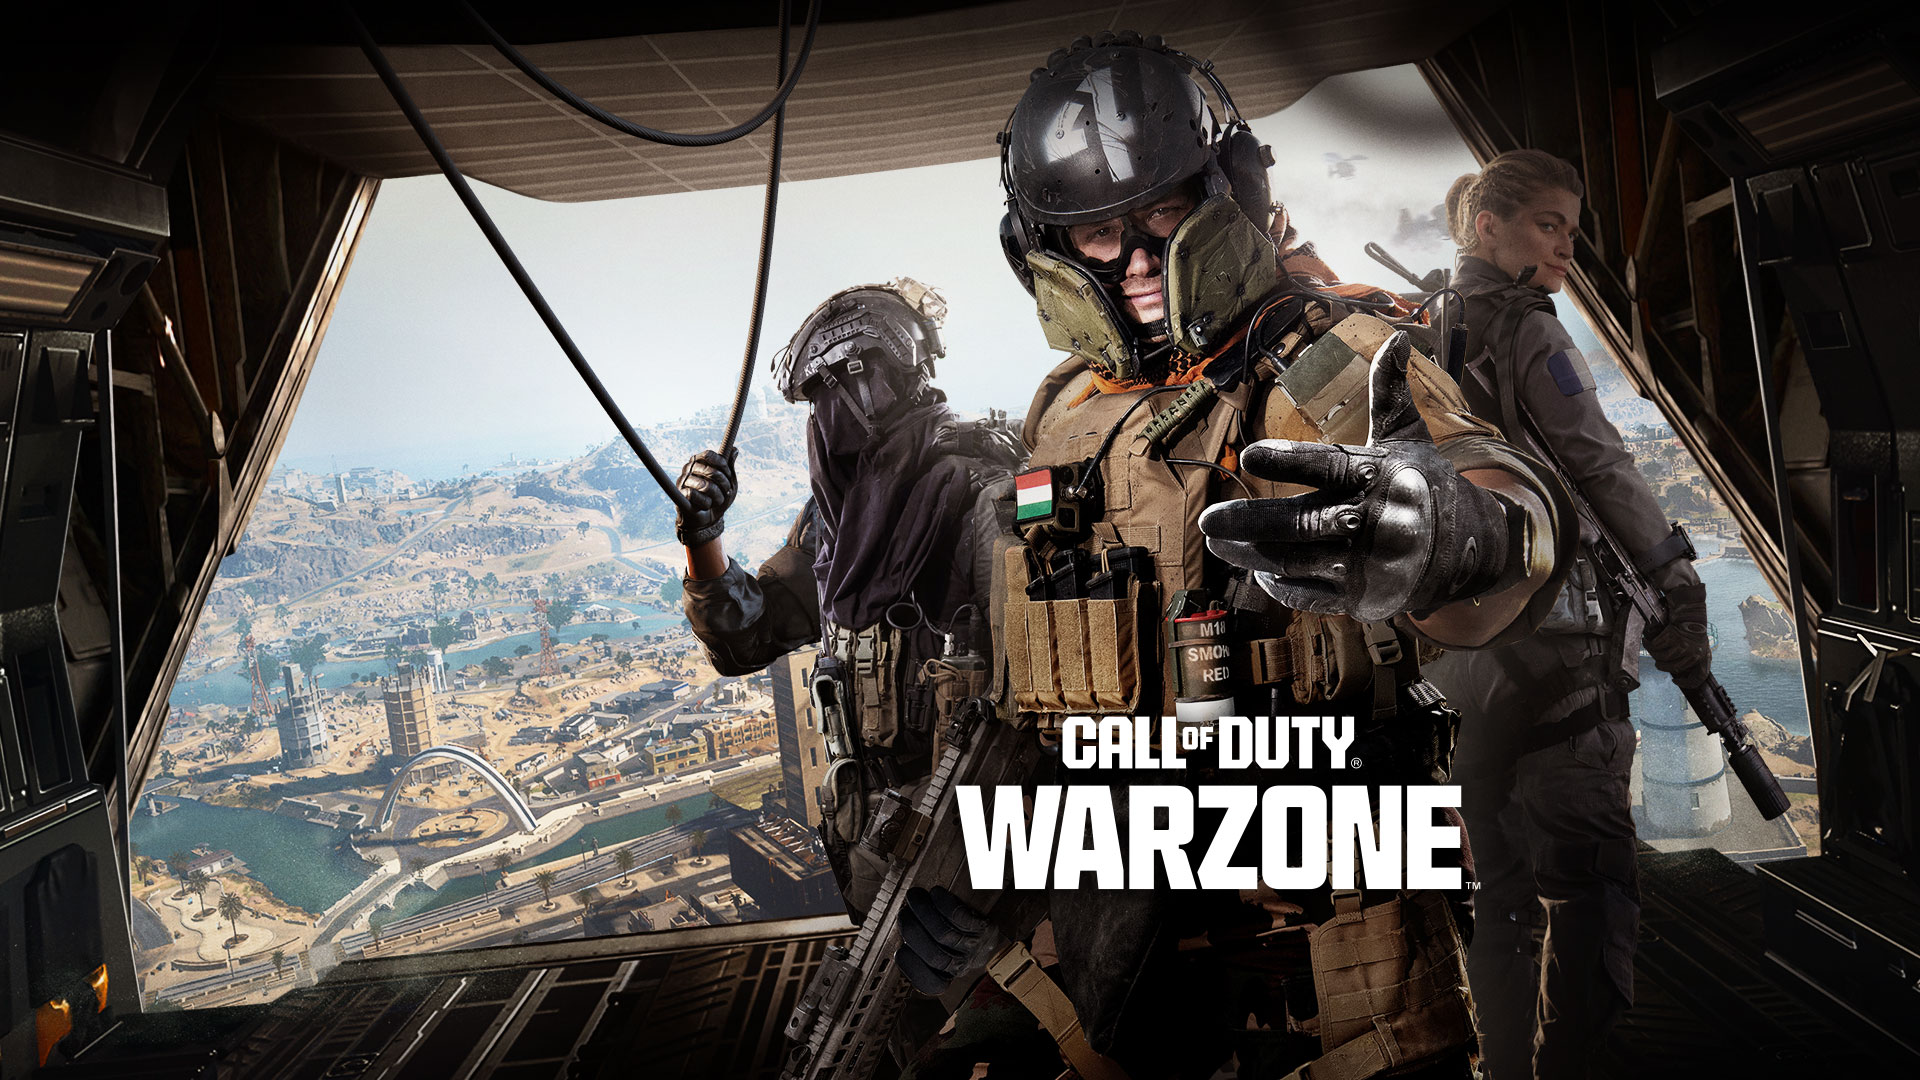 Call of Duty Warzone, standing in the back of a transport aircraft, a trio of Operators reach out to invite you to join the action.